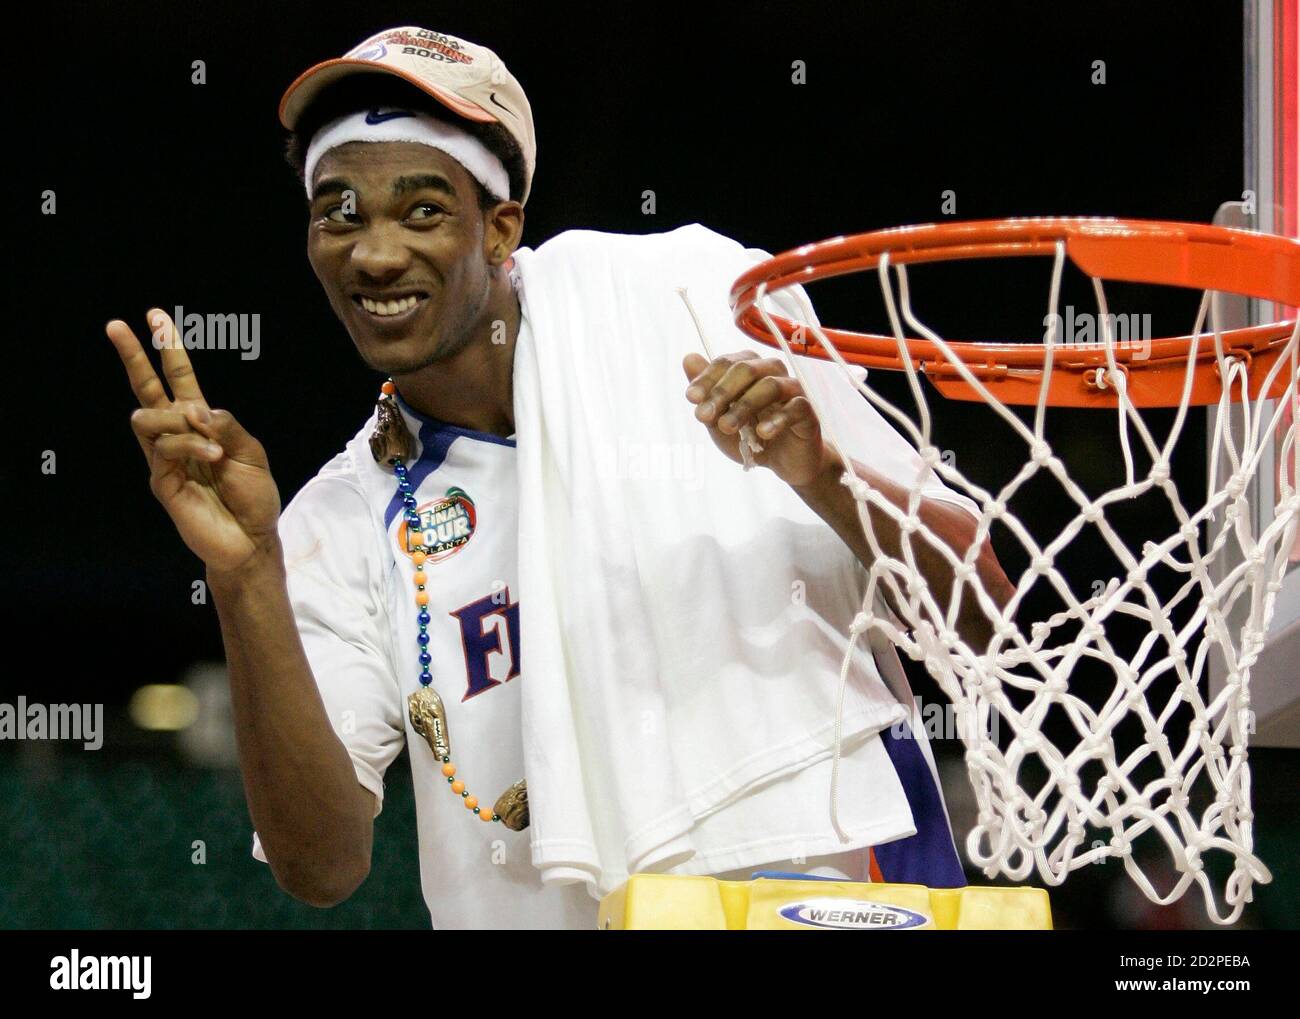 University of Florida Gators' Corey Brewer cuts down the net after his team  defeated the Ohio State Buckeyes in their NCAA Division 1 men's basketball  championship game in Atlanta, Georgia, April 2,